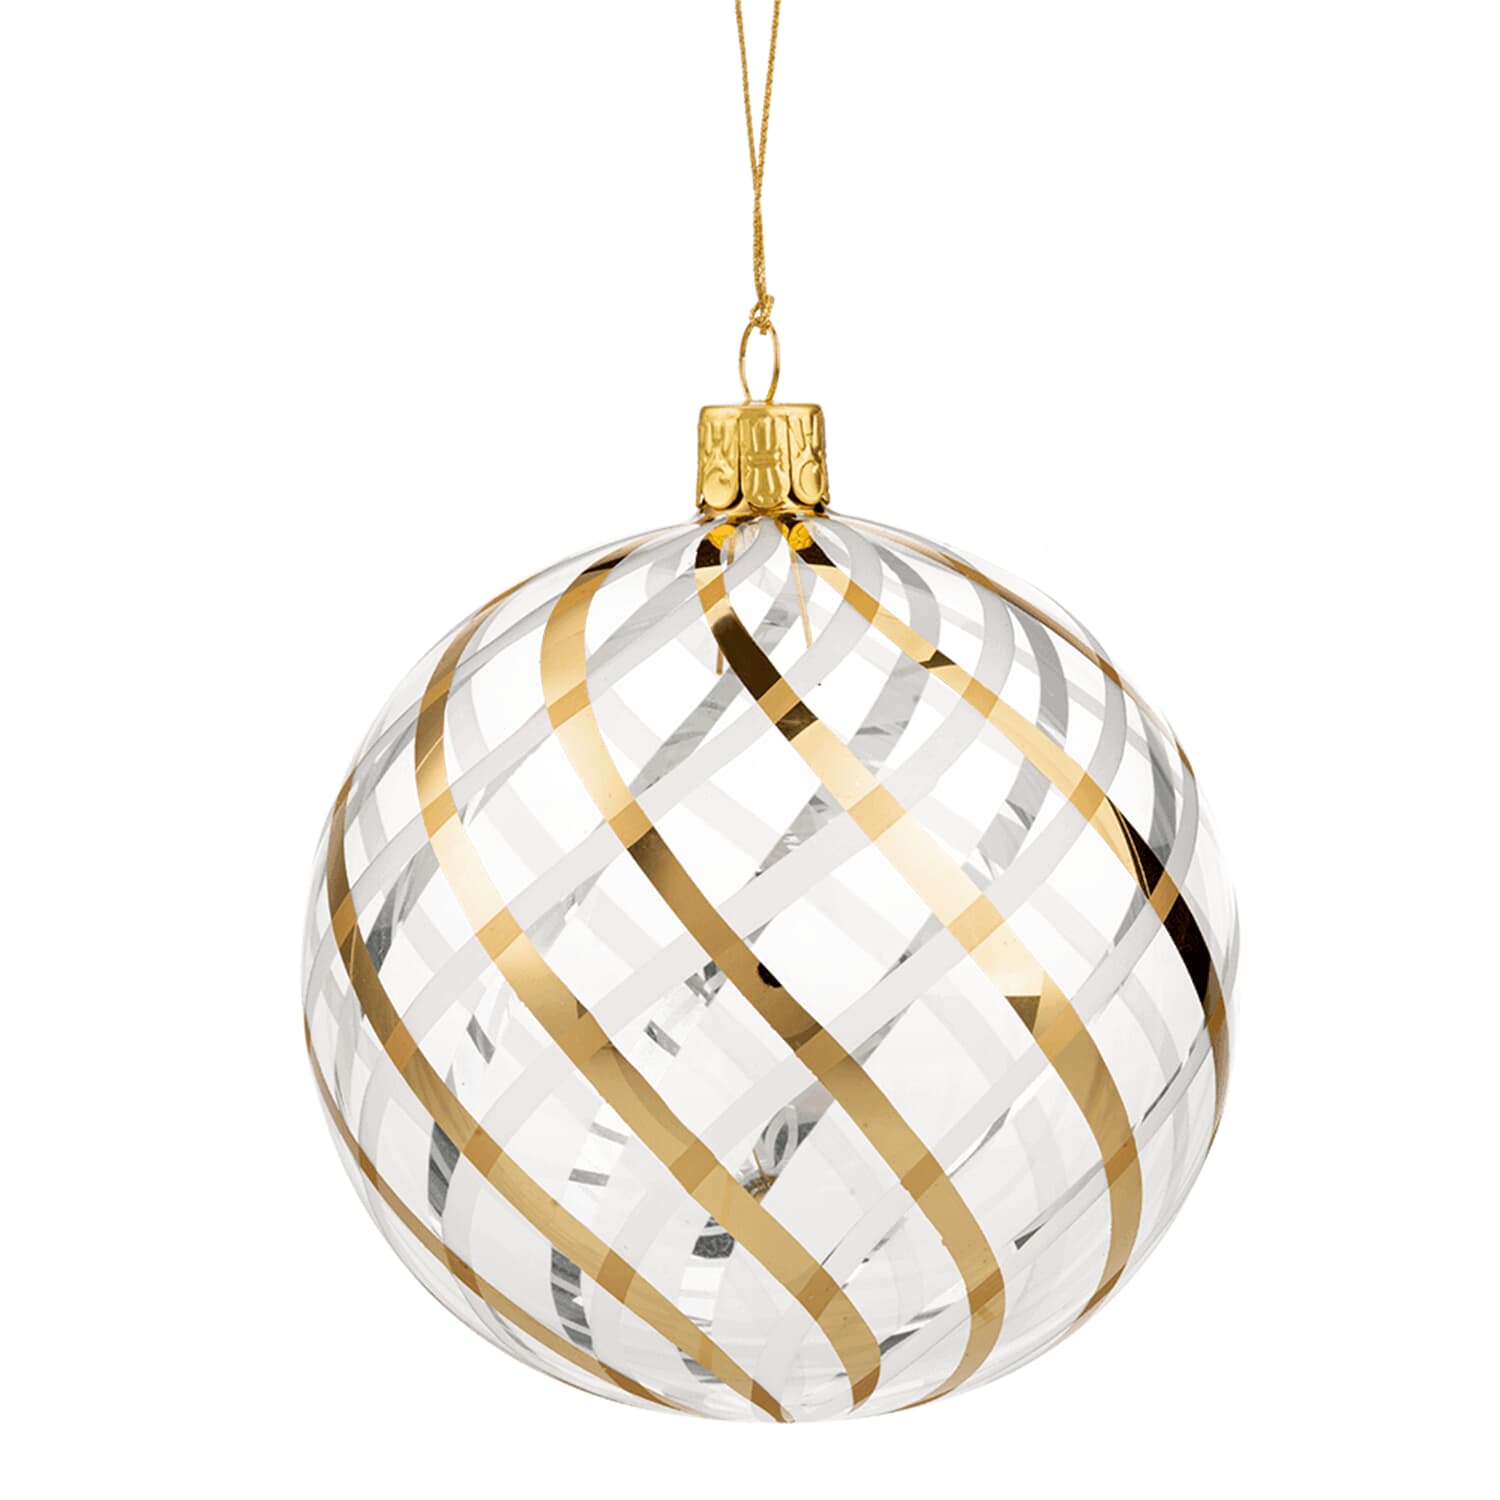 Glass bauble clear with gold-white net pattern, 10 cm